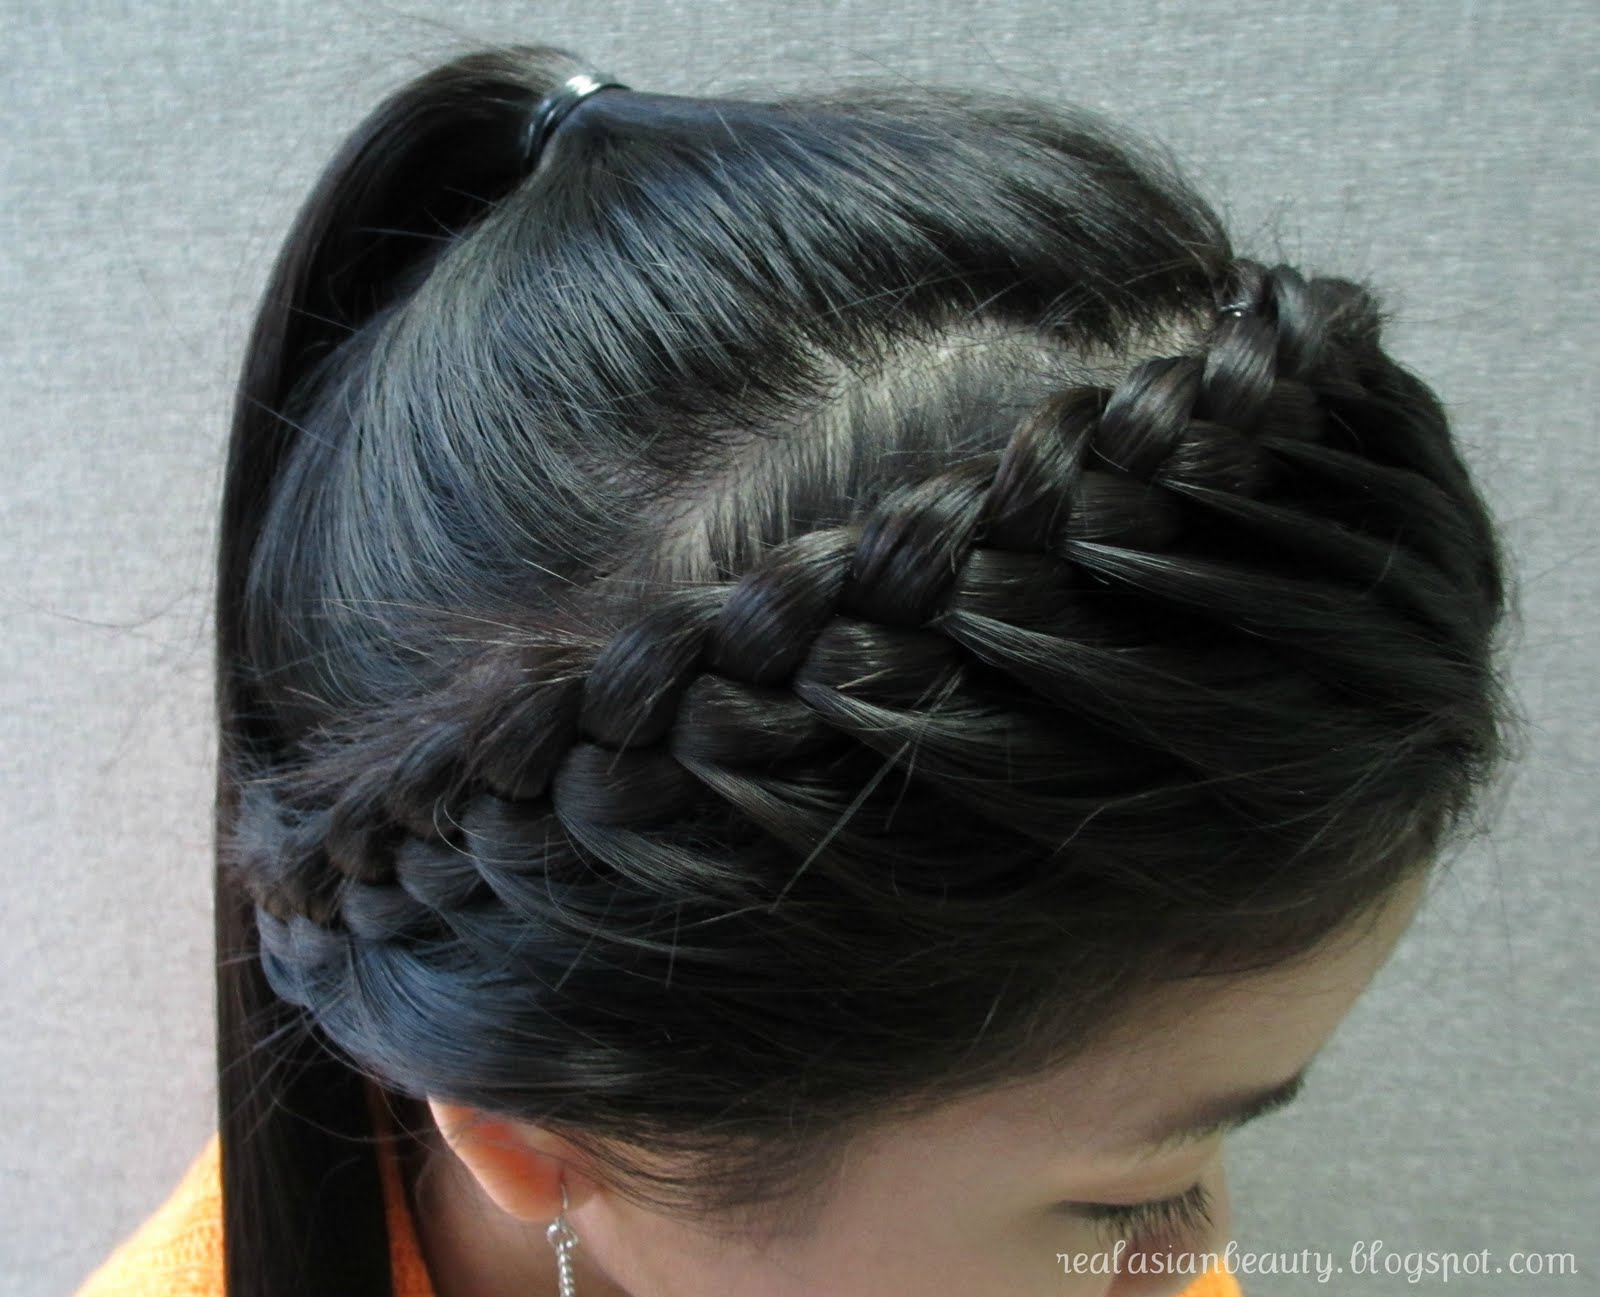 Real Asian Beauty: Crown Braid with Ponytayil Hair Tutorial